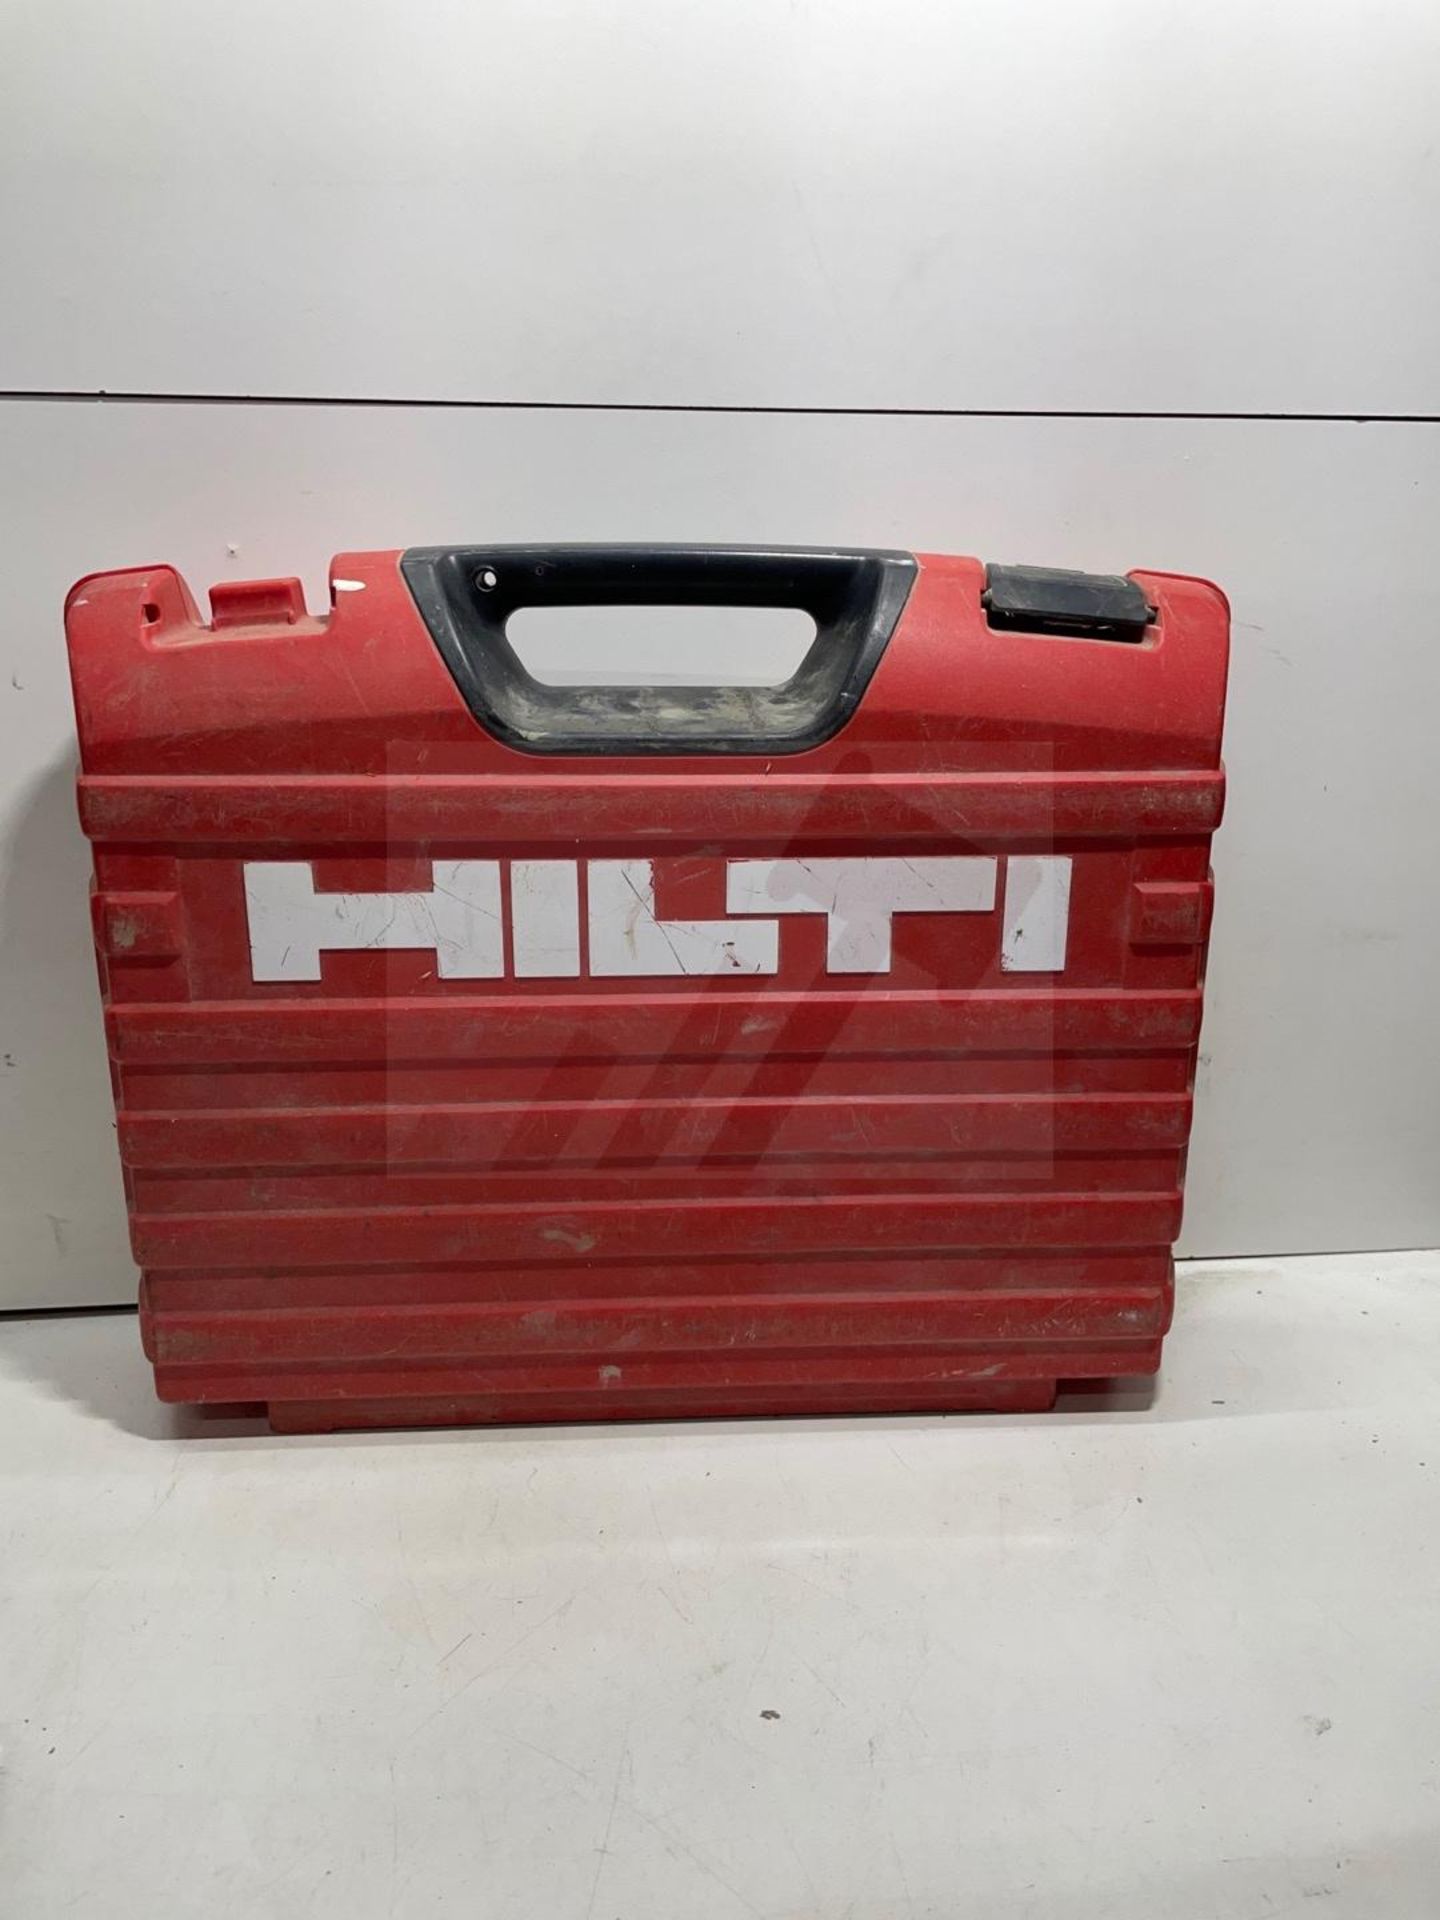 HILTI TE 2-A22 Cordless Rotary Hammer - Image 6 of 6